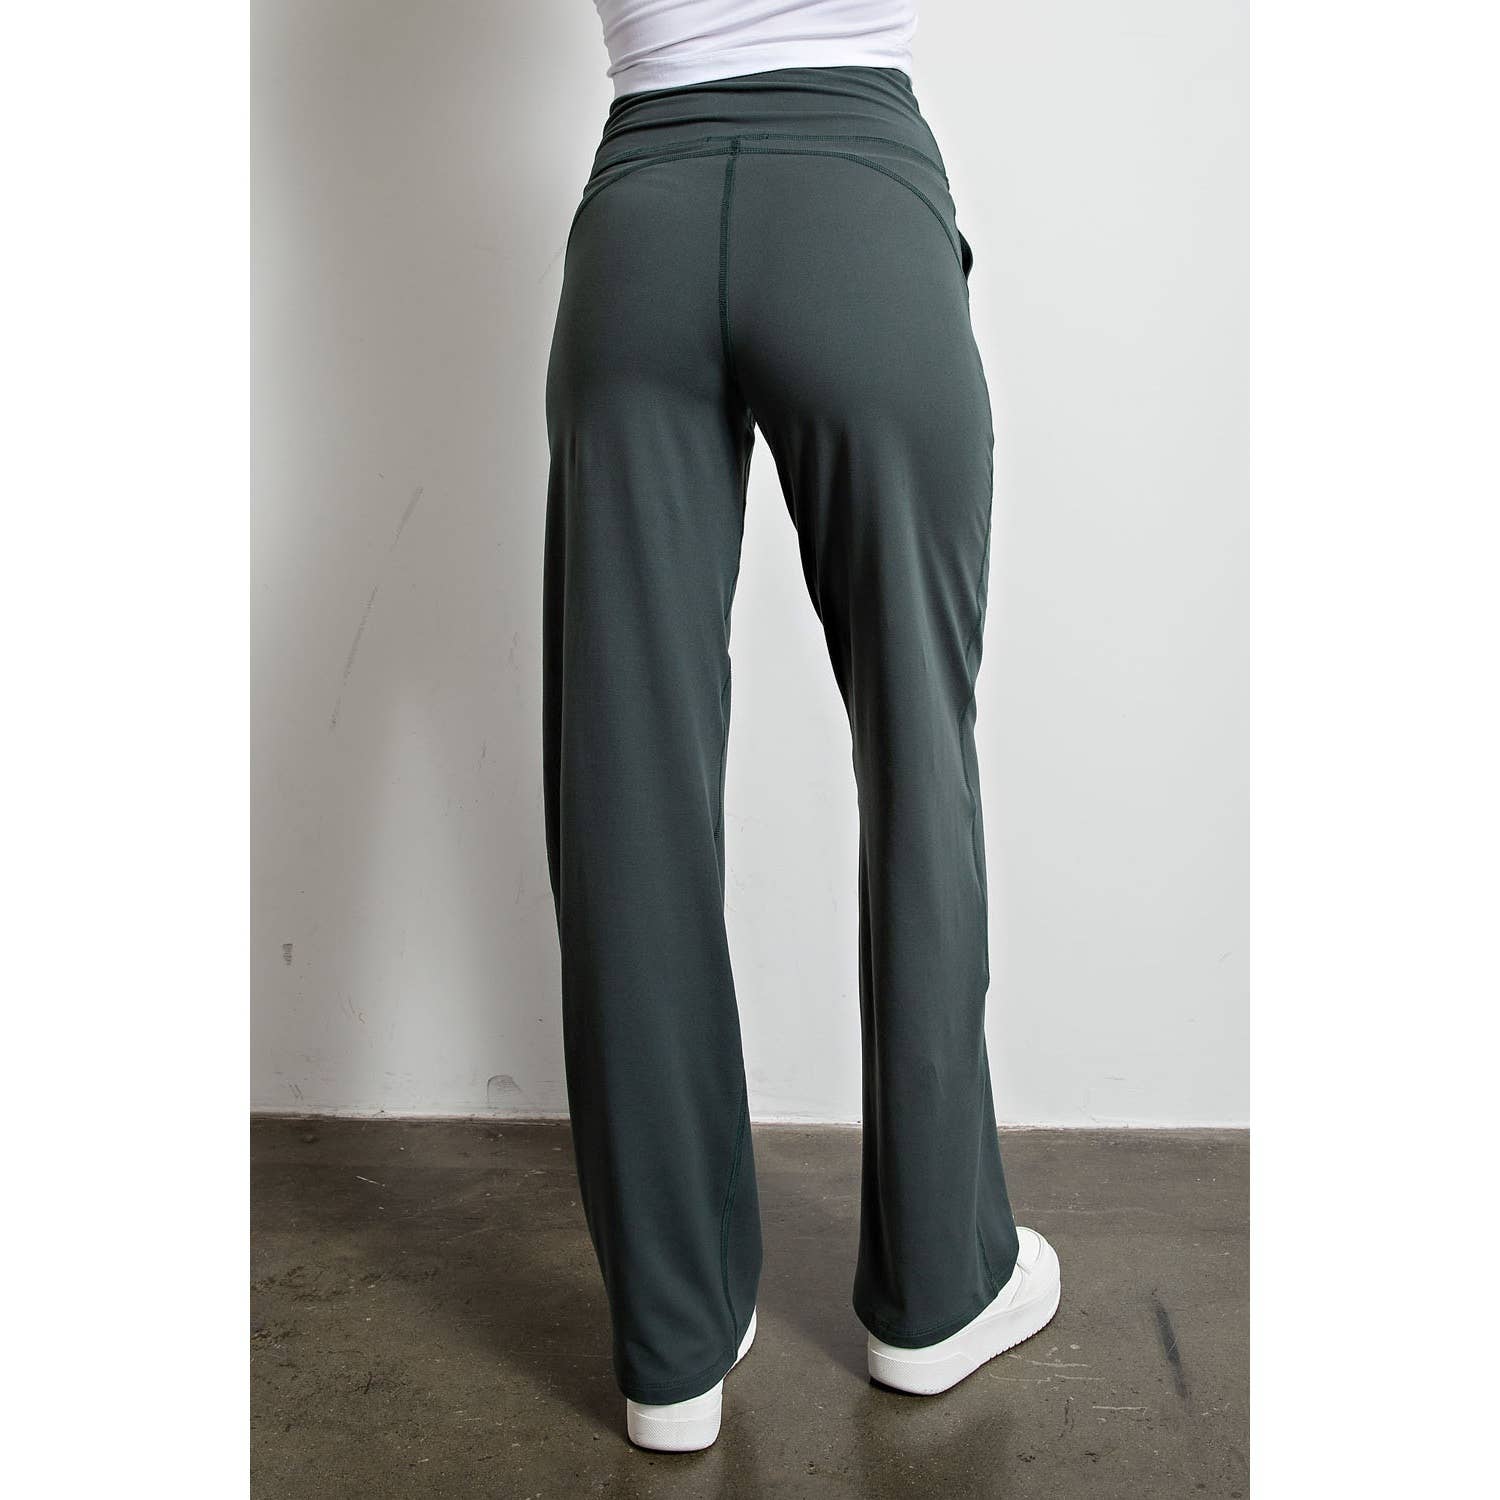 BUTTER SOFT STRAIGHT CASUAL YOGA PANTS